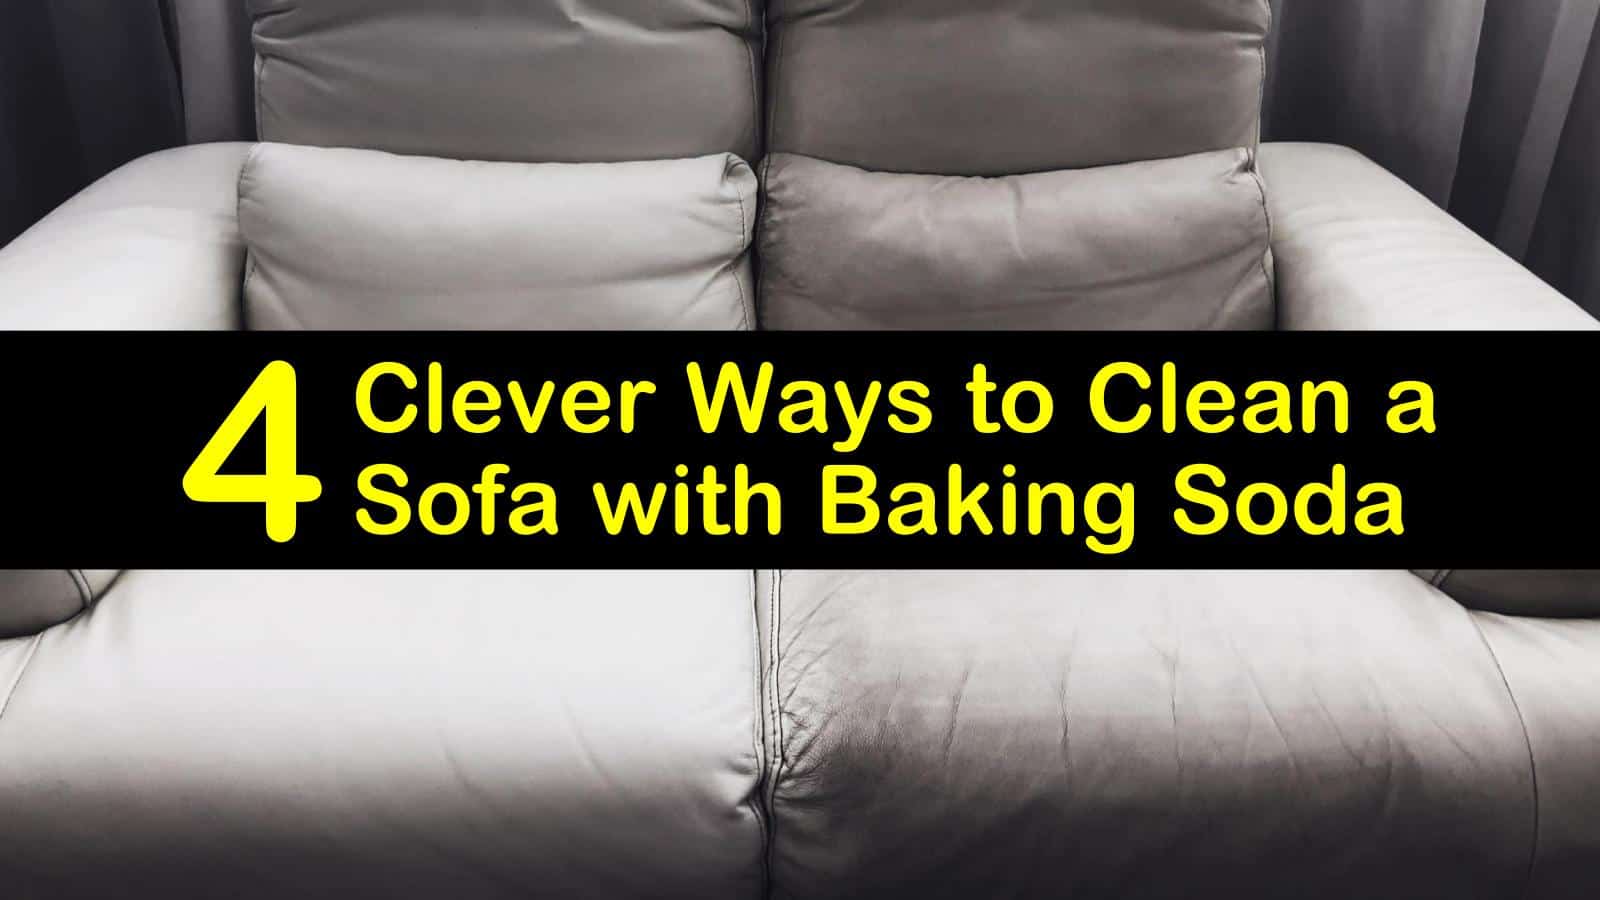 Clean A Sofa With Baking Soda, Can I Use Baking Soda To Clean My Sofa